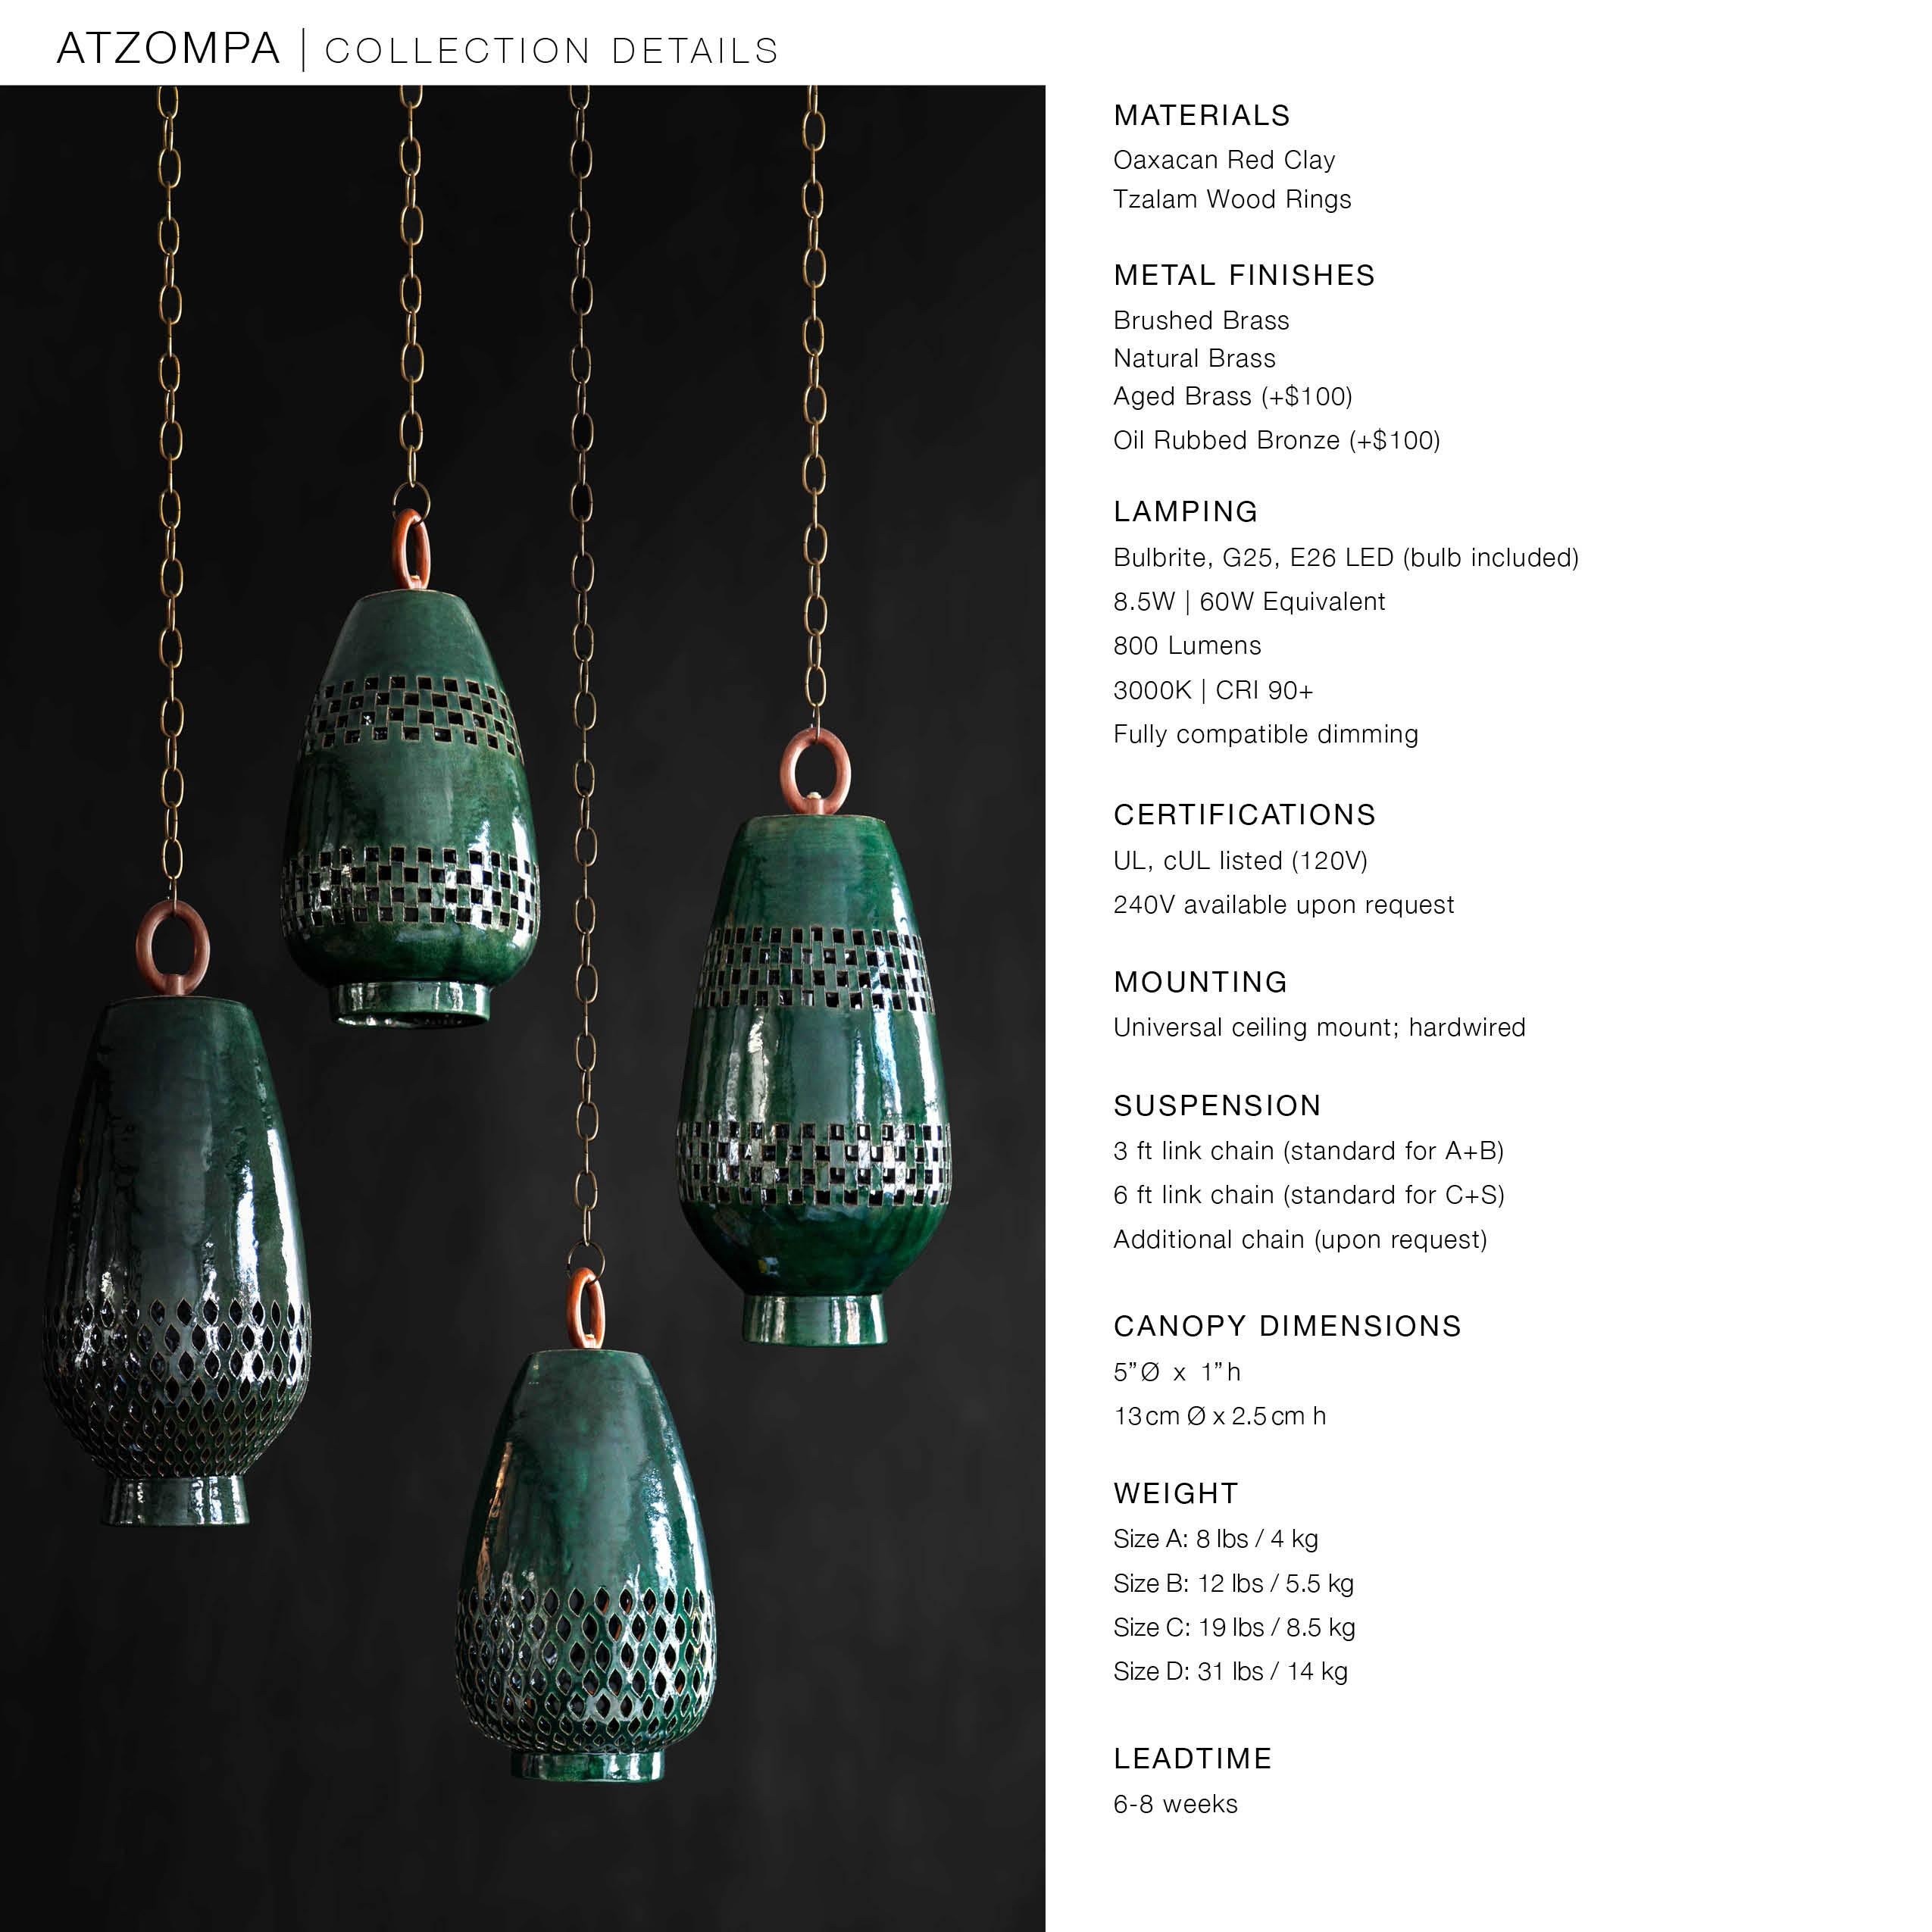 Small Emerald Ceramic Pendant Light, Oiled Bronze, Ajedrez Atzompa Collection In New Condition For Sale In New York, NY